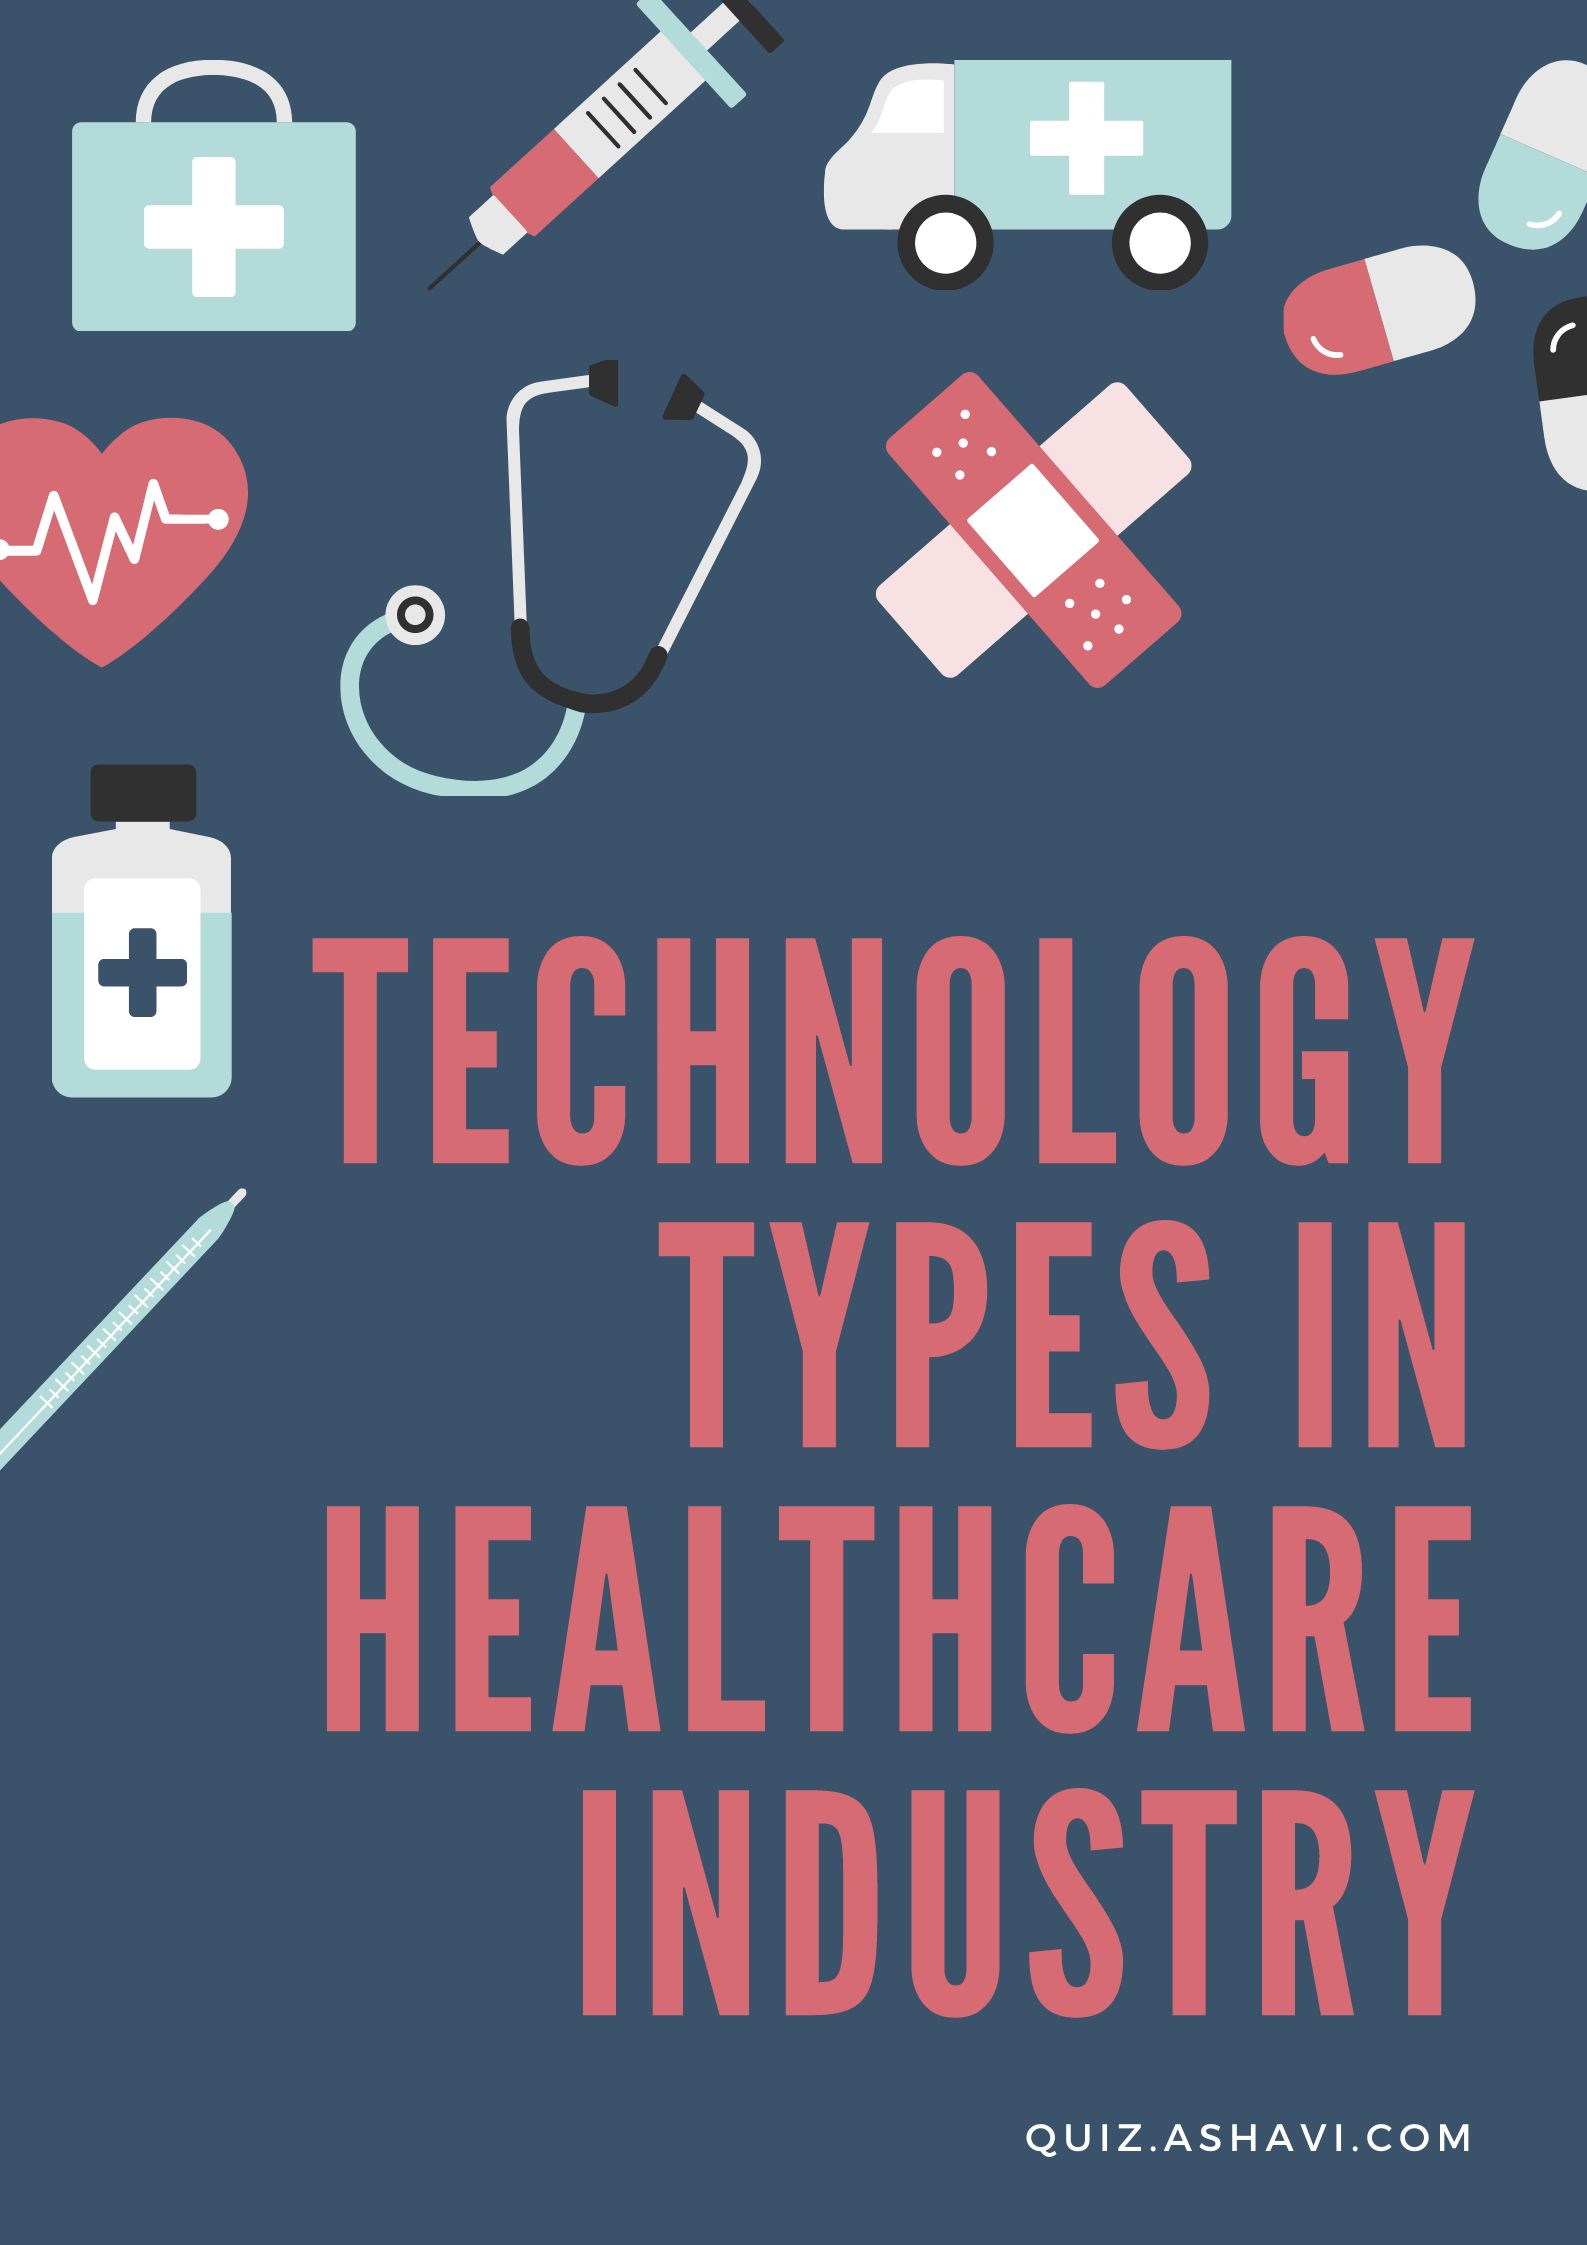 Technology types in Healthcare industry